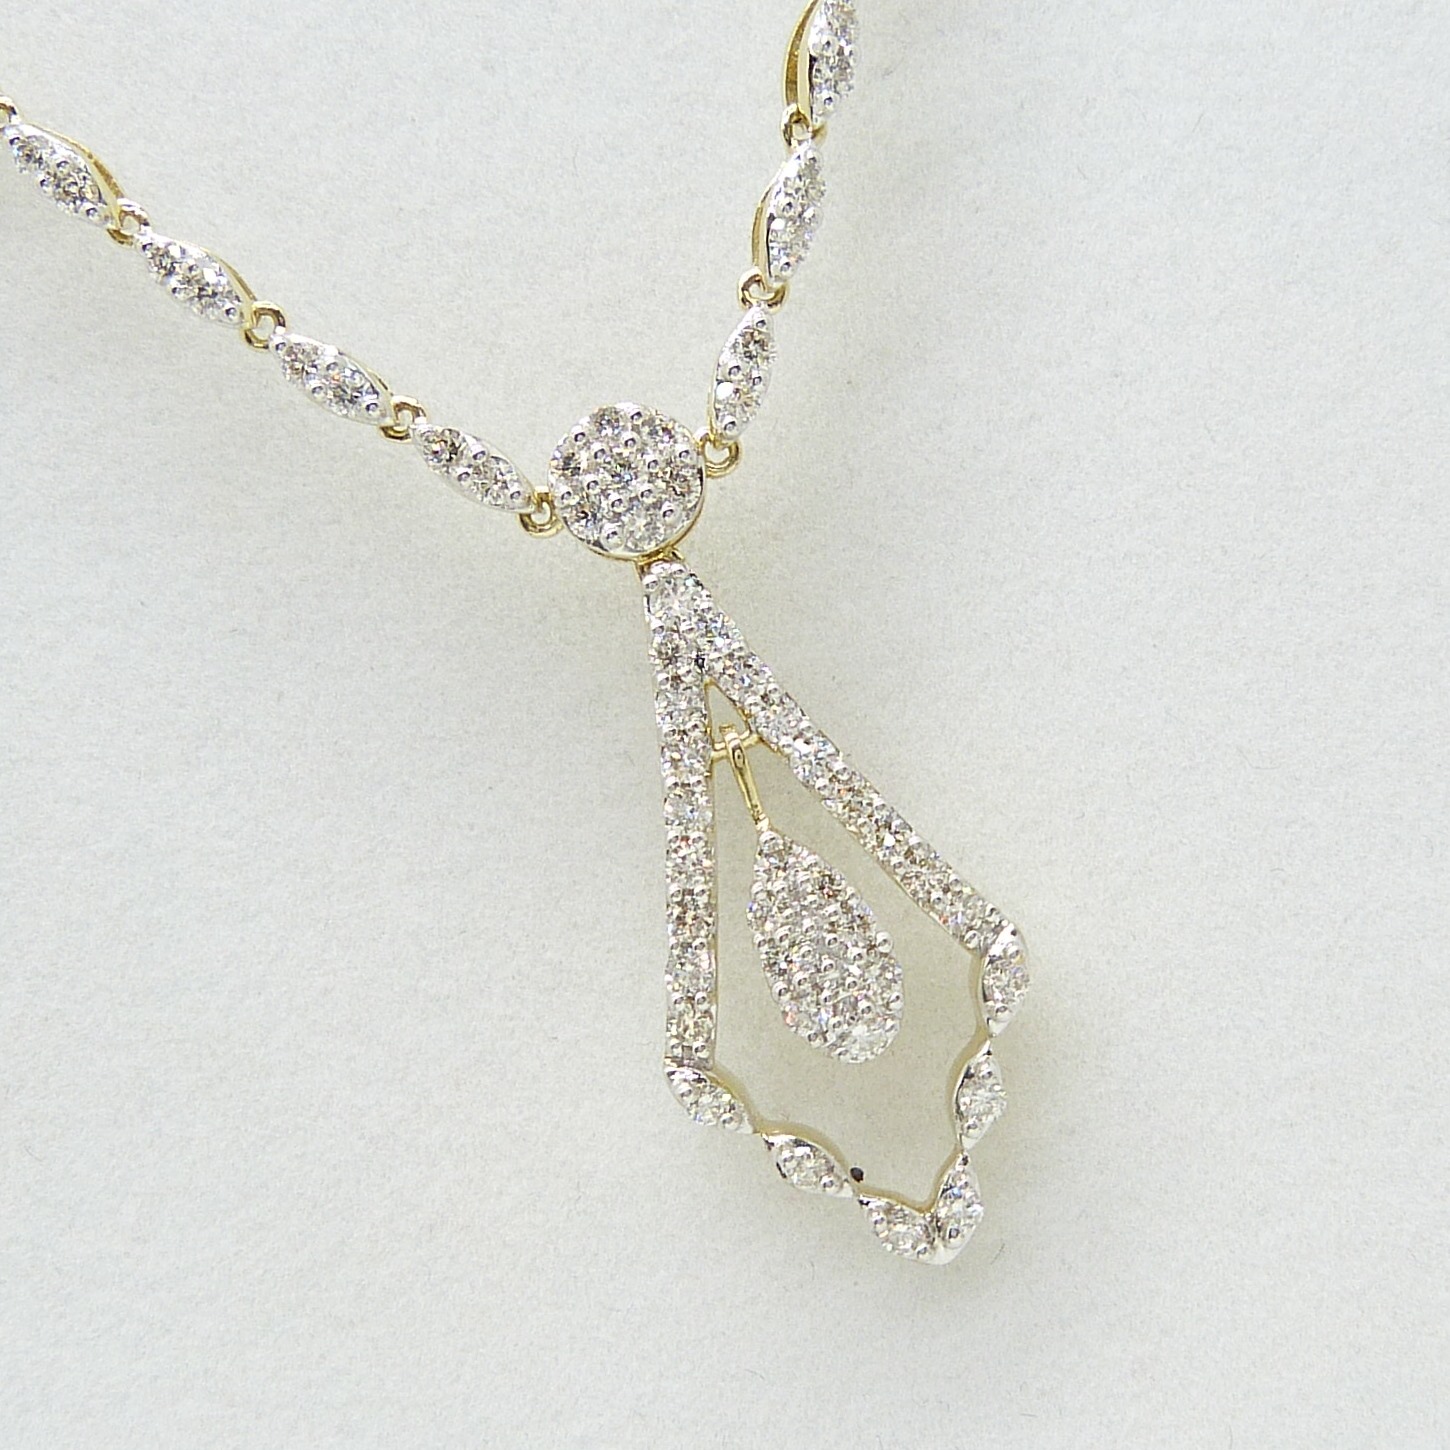 Exquisite Continental-Style Ornate 1.80 Carat Diamond-Set Necklace In 9ct Yellow Gold